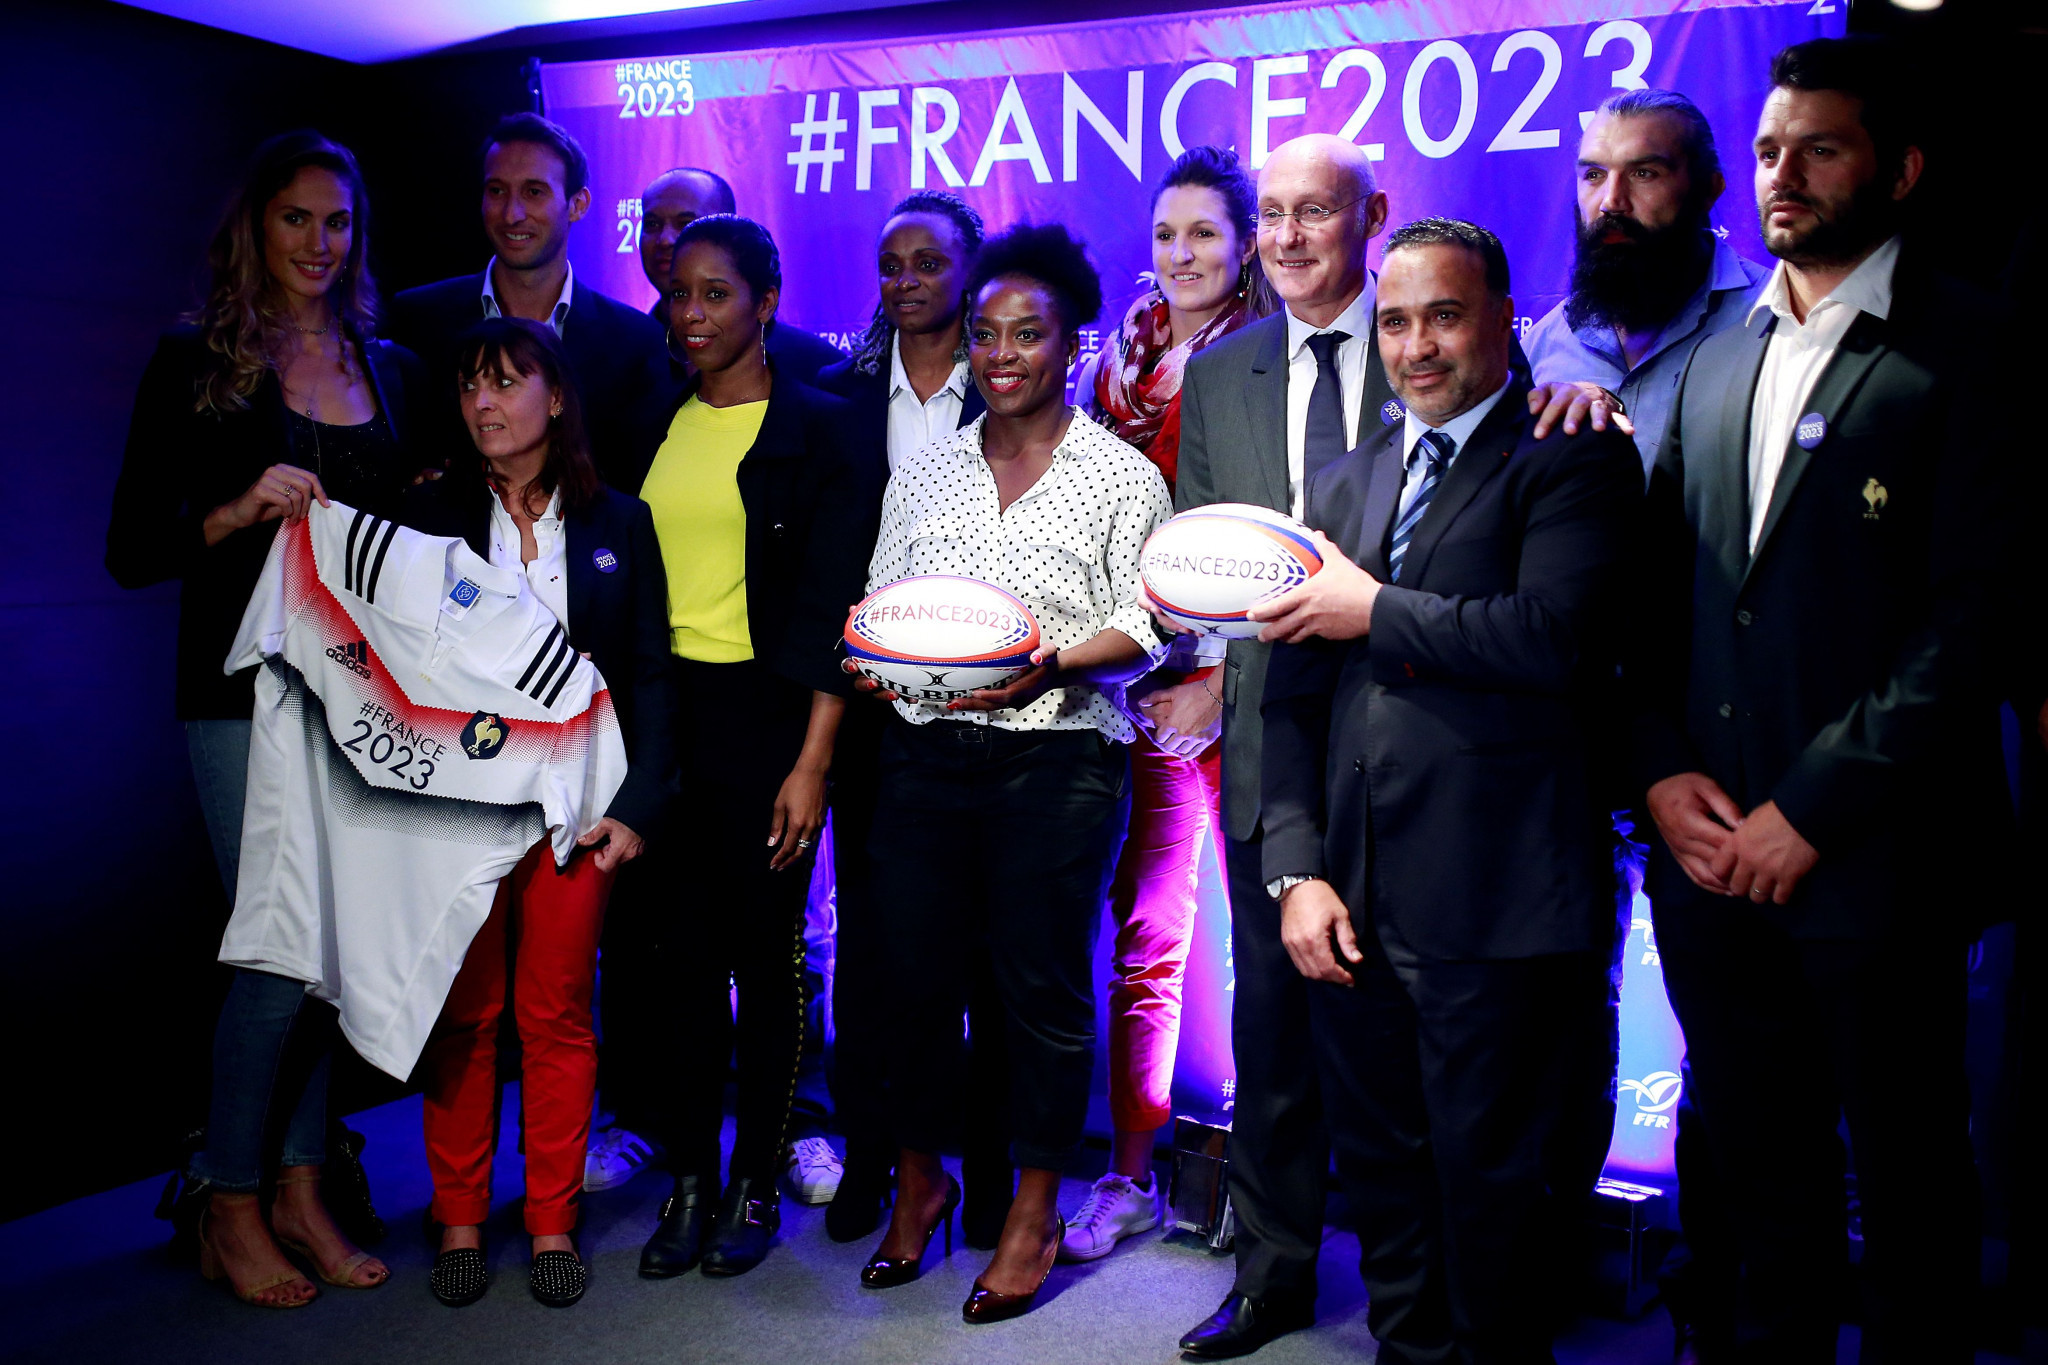 French athletes Elodie Clouvel, left, Fabien Gilot, second left, Eunice Barber, sixth left, and Laporte join French former rugby player Sebastien Chabal to promote France's candidacy for the 2023 Rugby World Cup ©Getty Images